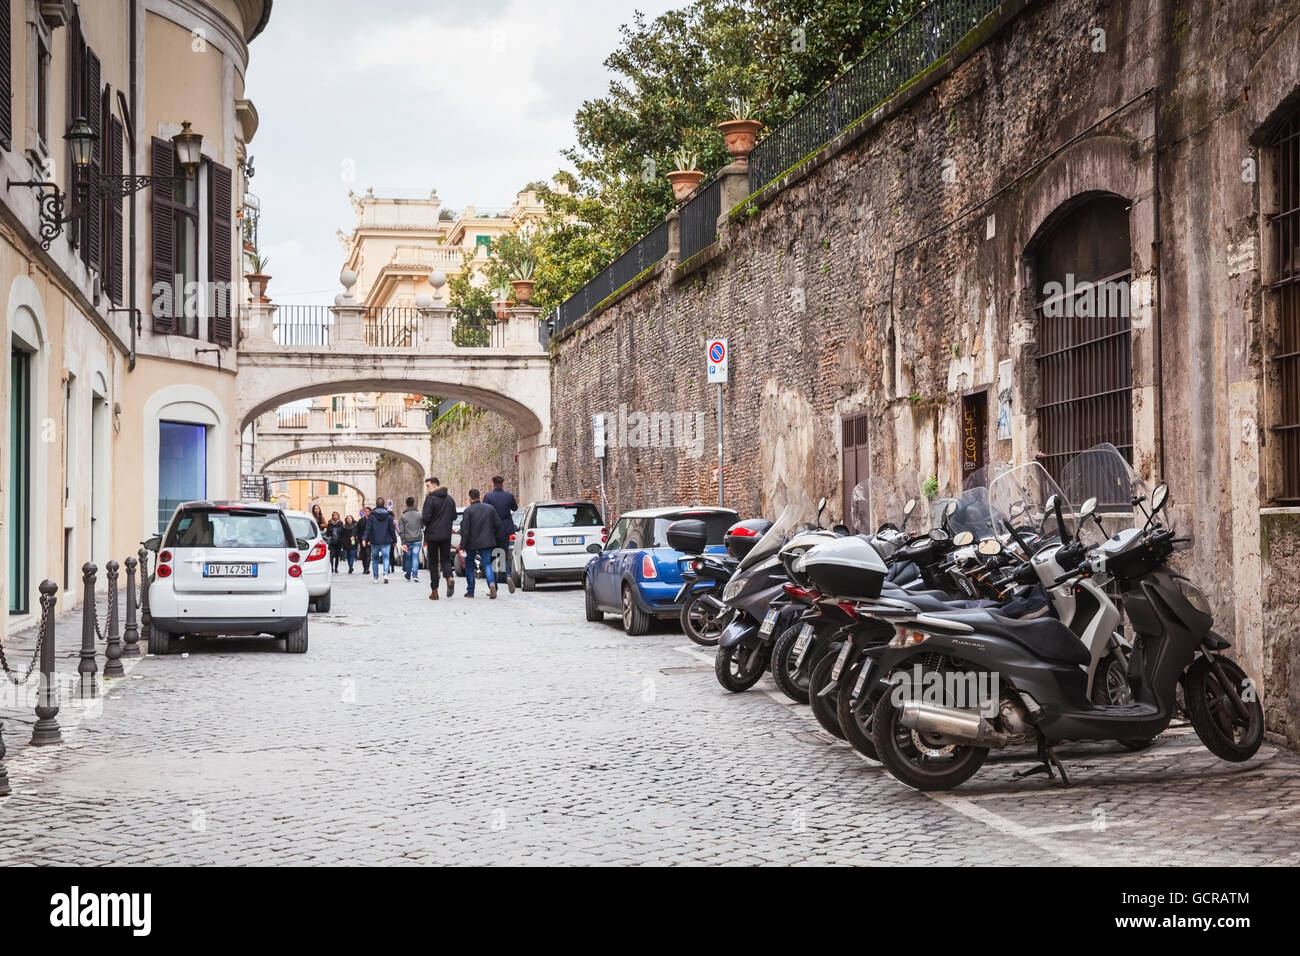 Rome, Italy - February 13, 2016: Ordinary street in old Rome with parked cars and motorcycles Stock Photo